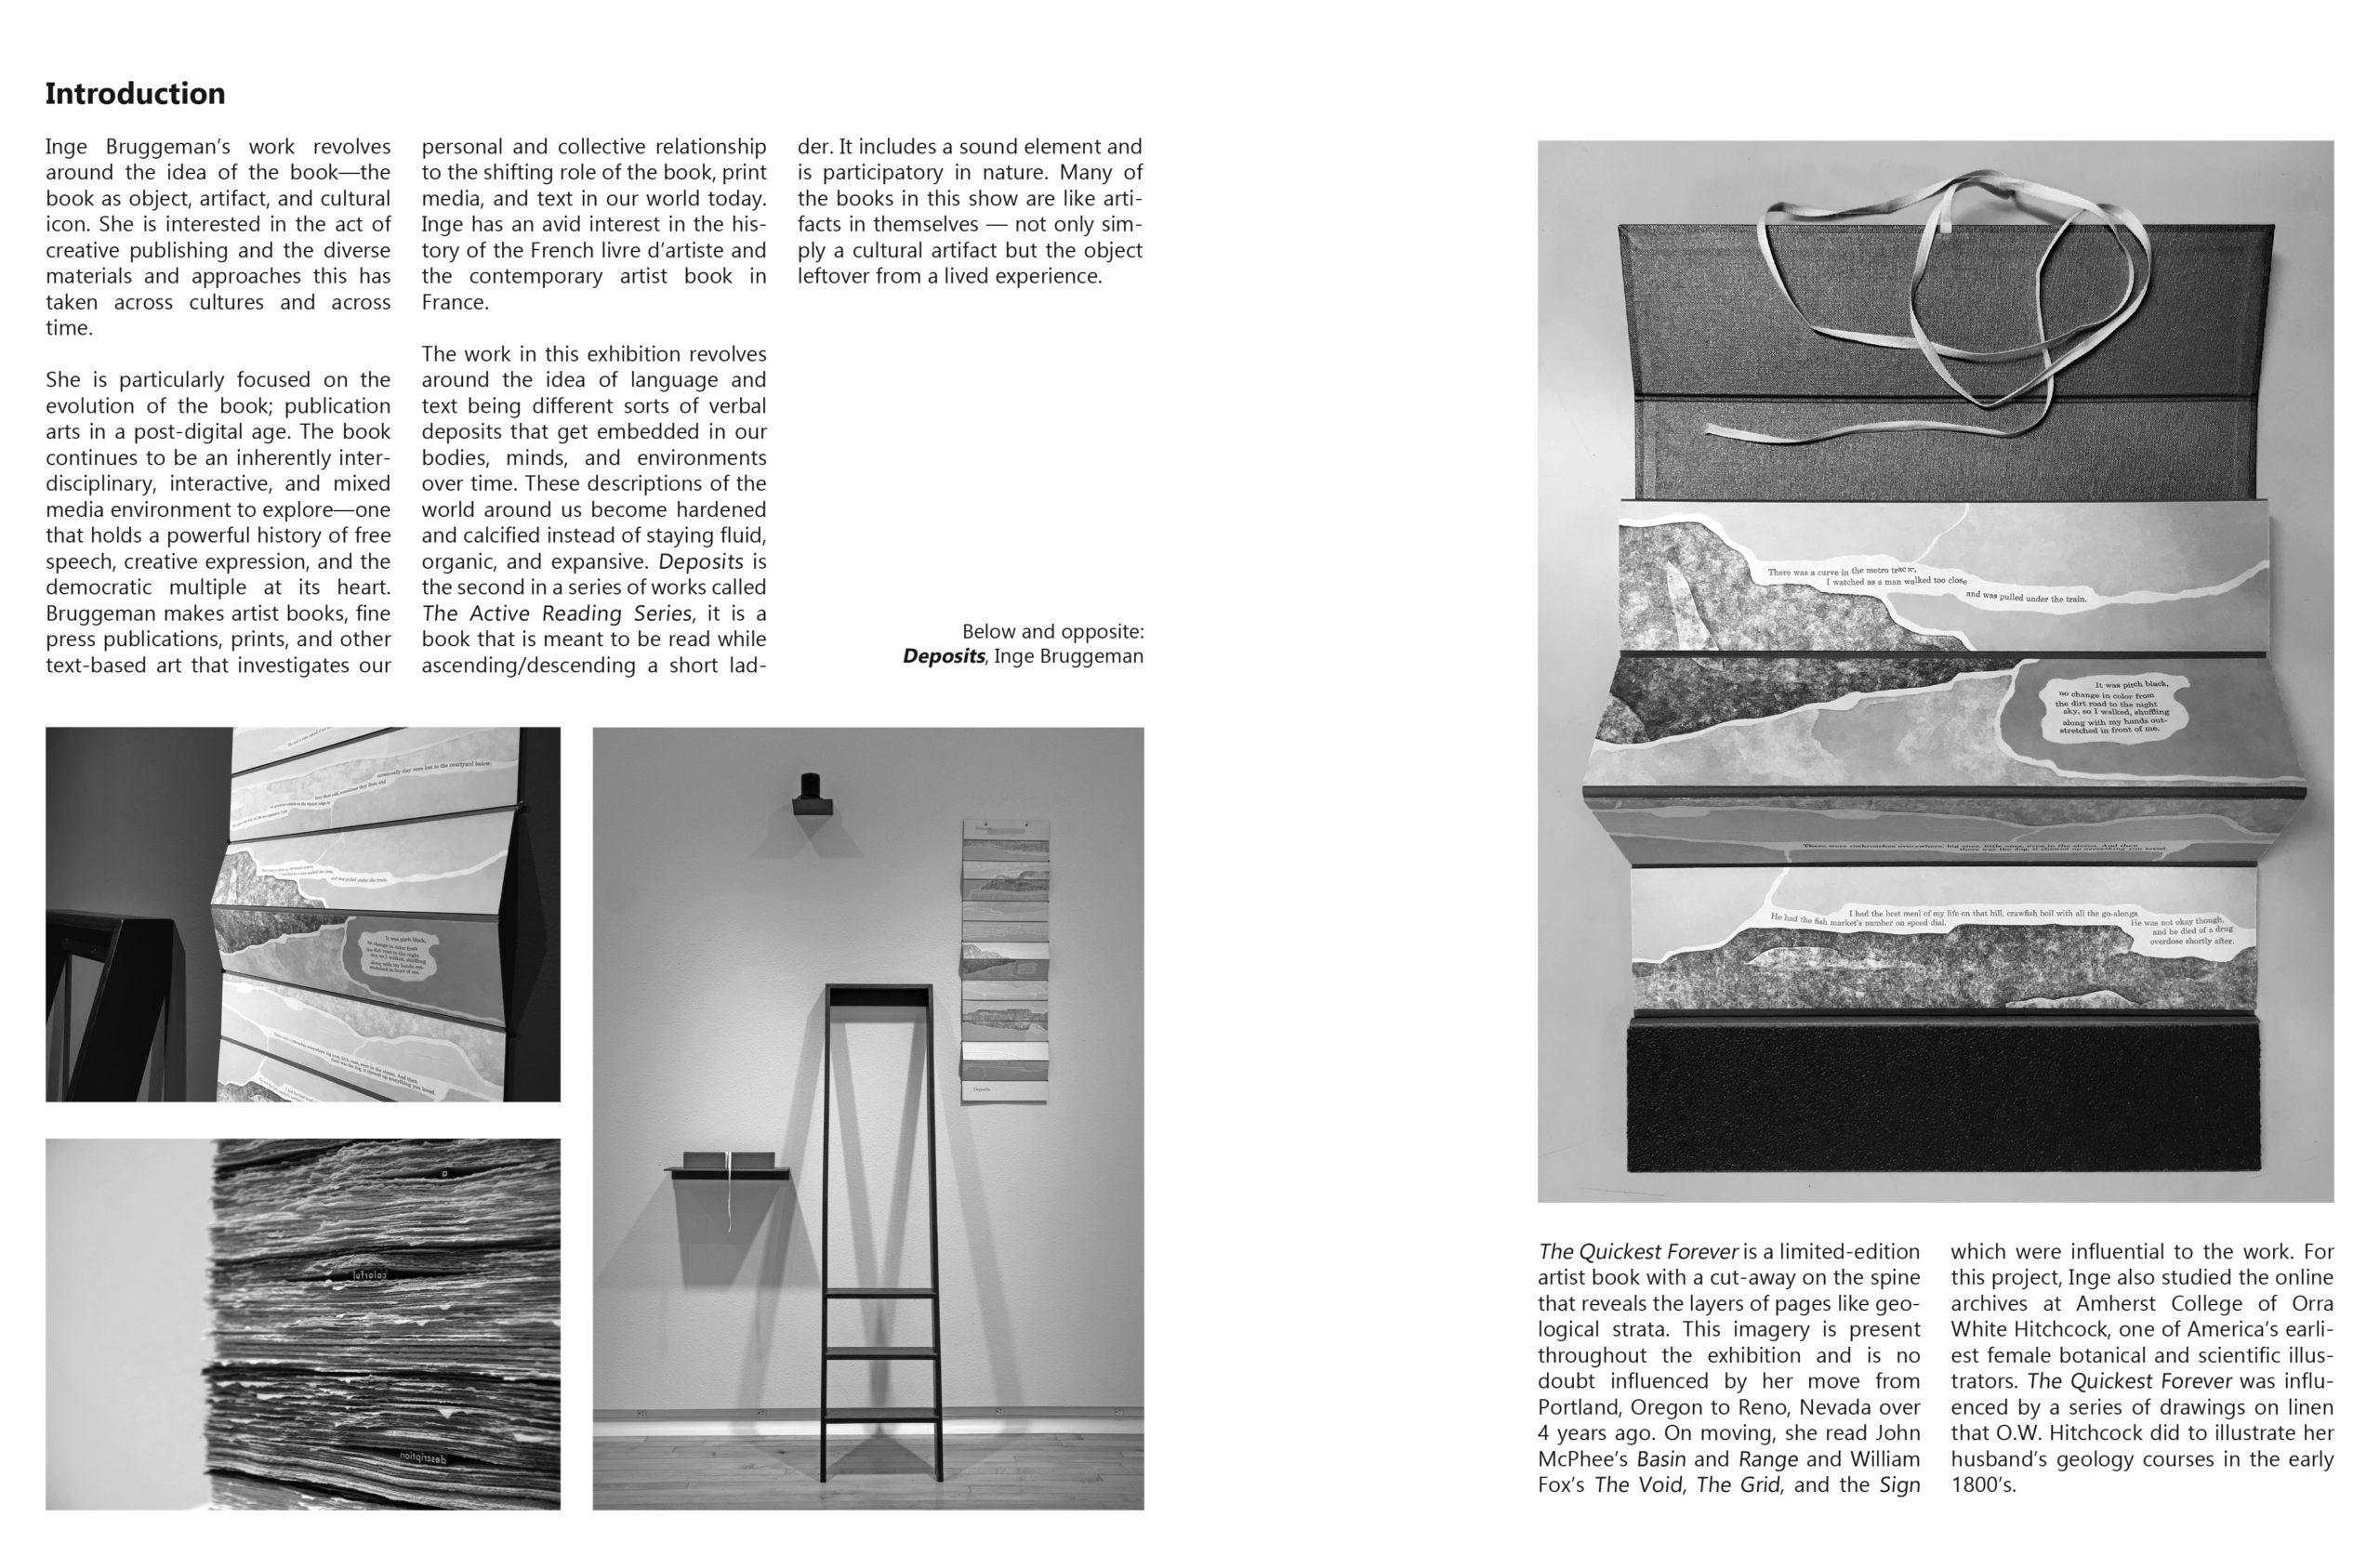 brochure spread with images of her work and a description of the work